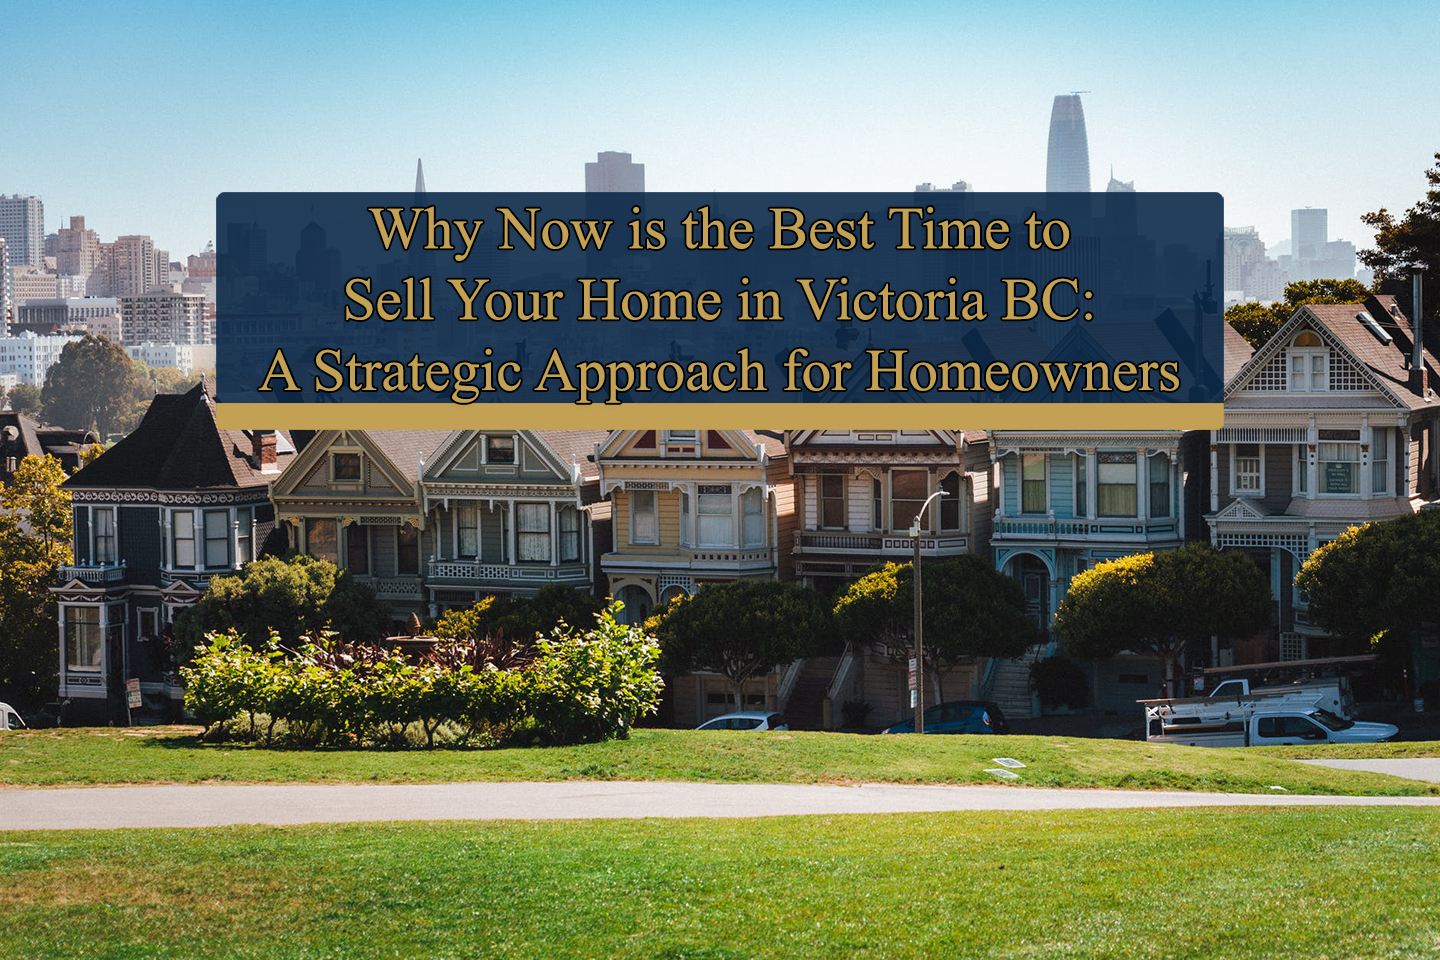 Why now is the best time to sell your home in Victoria BC